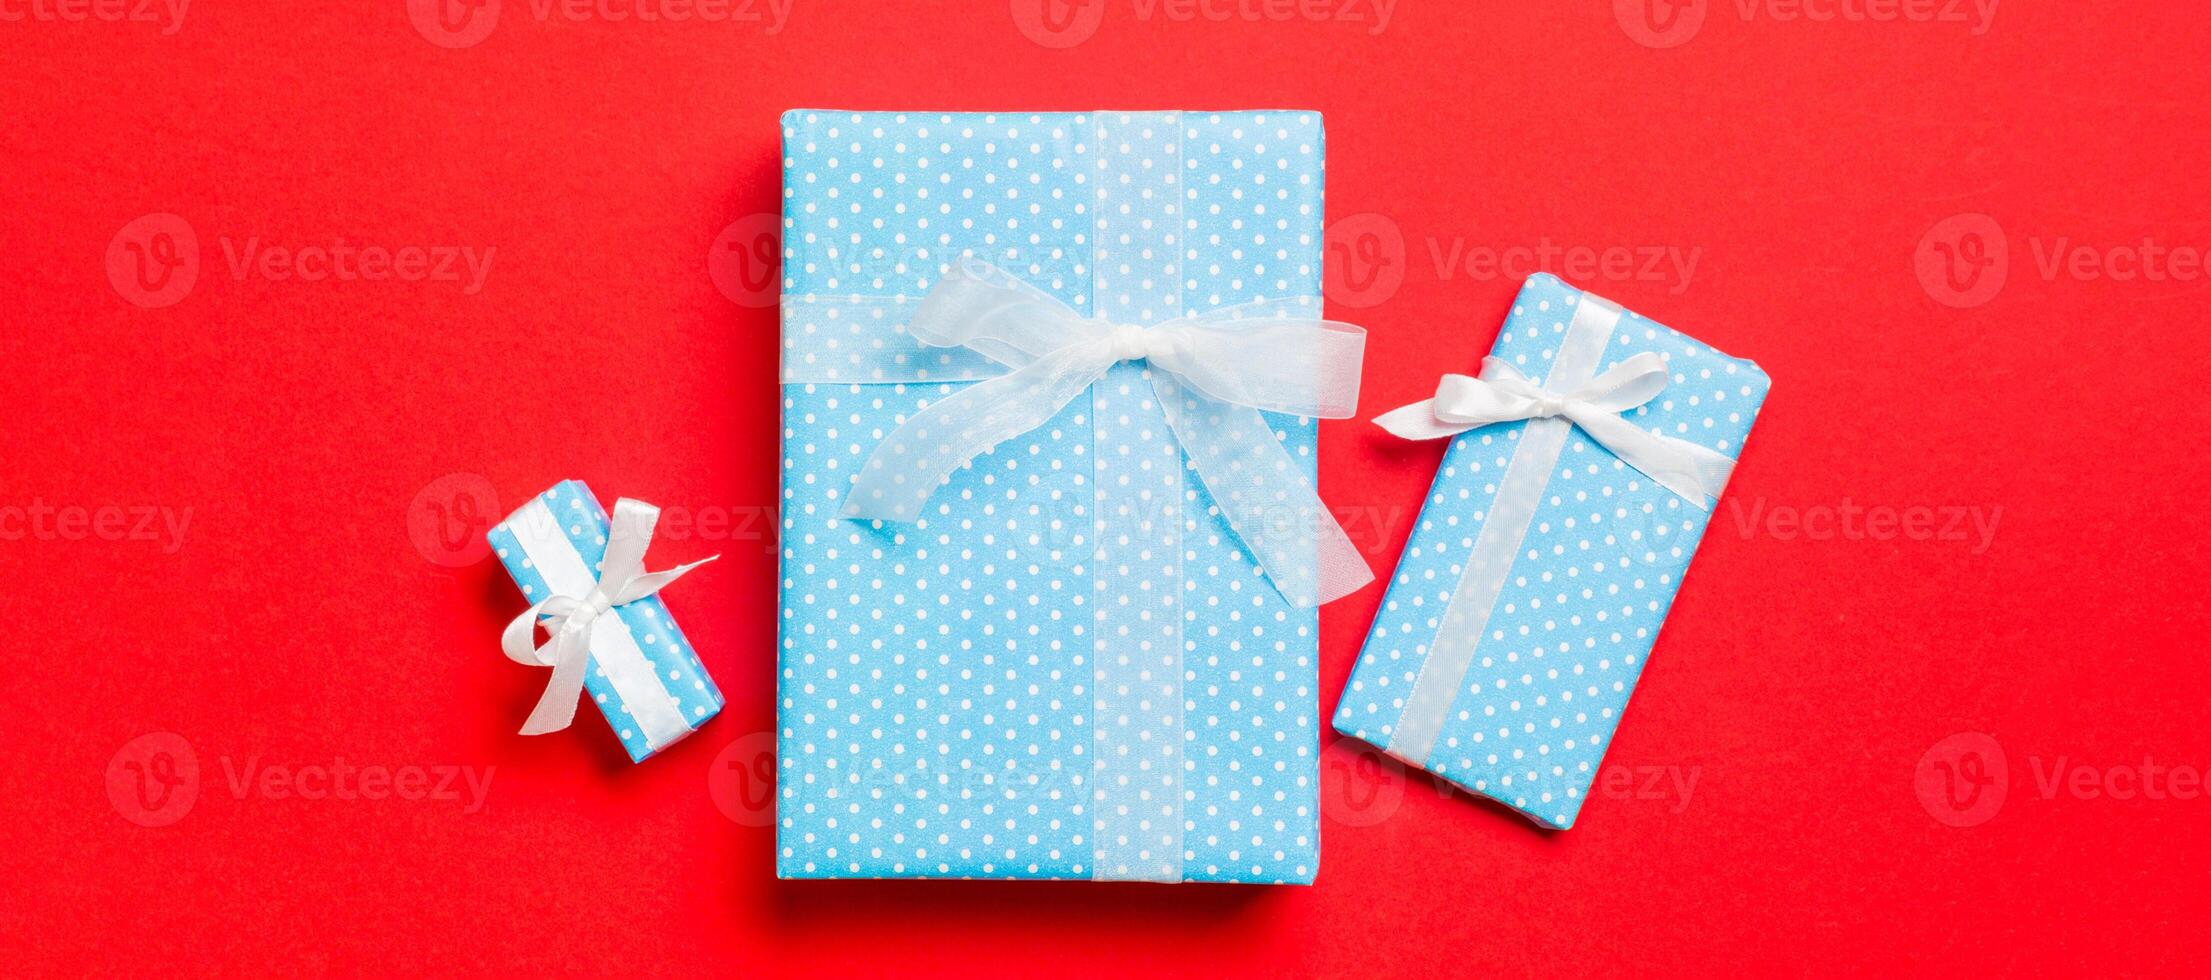 wrapped Christmas or other holiday handmade present in paper with white ribbon on red background. Present box, decoration of gift on colored table, top view photo